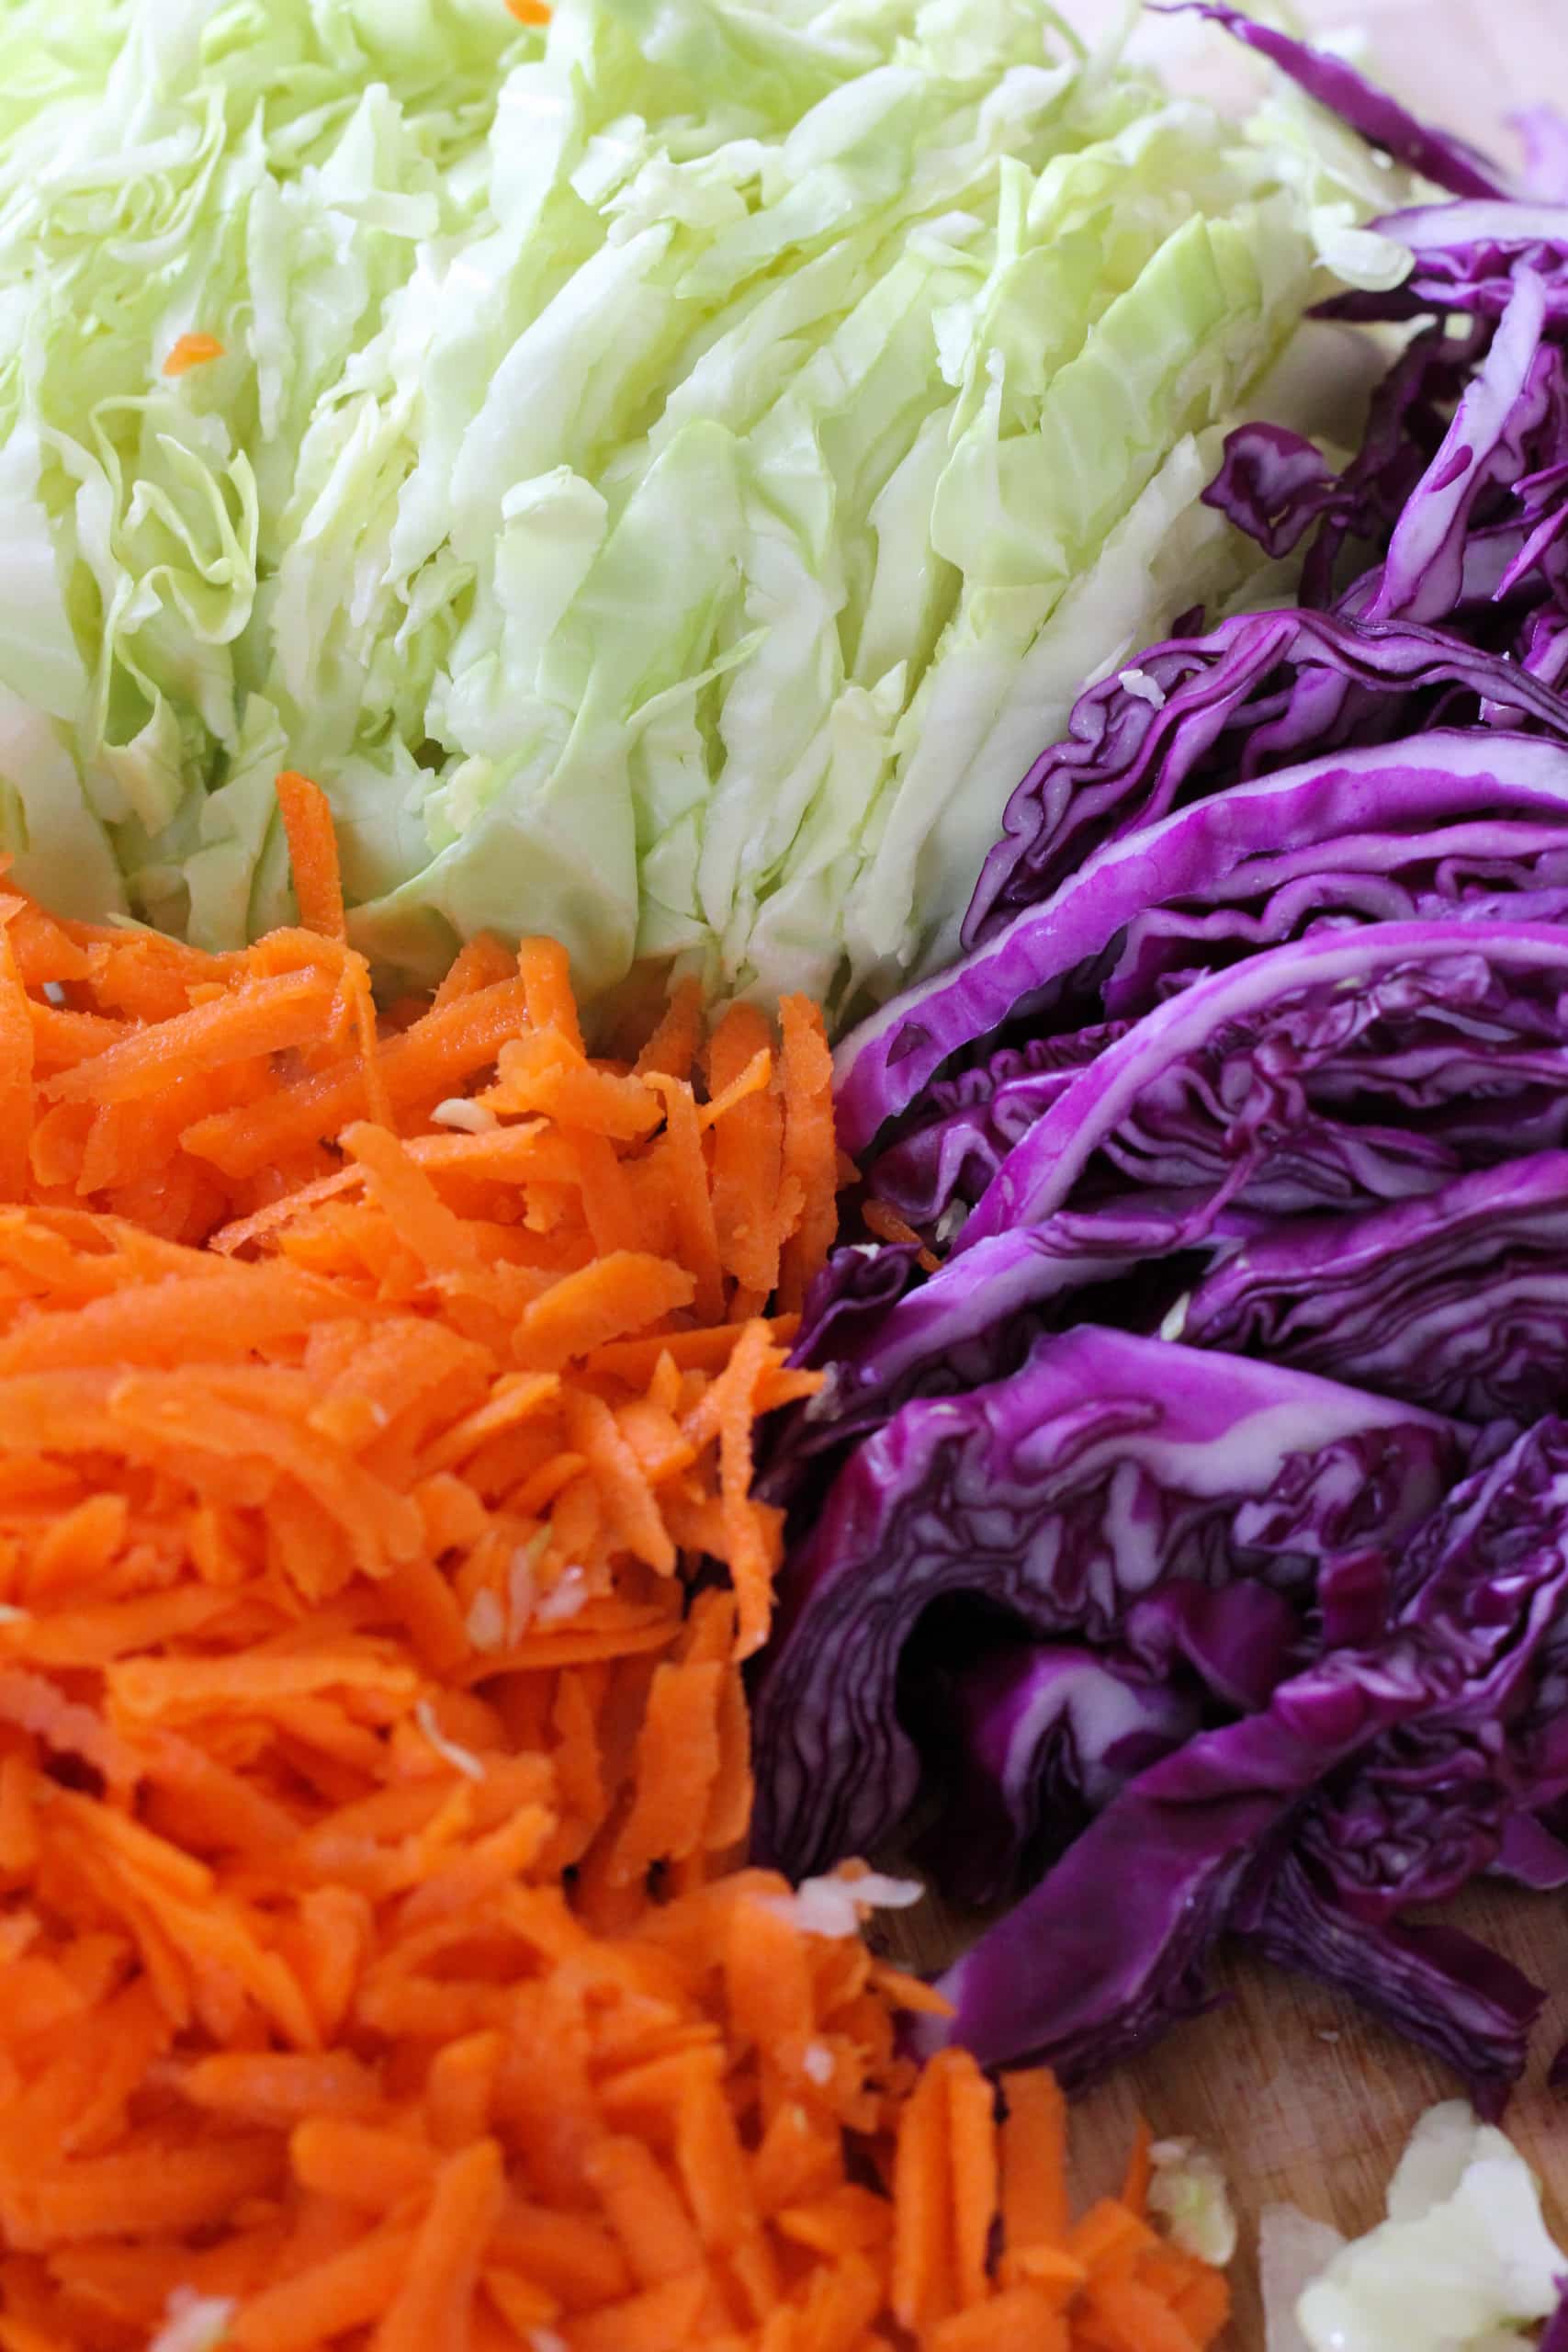 sliced carrots, red cabbage and green cabbage.